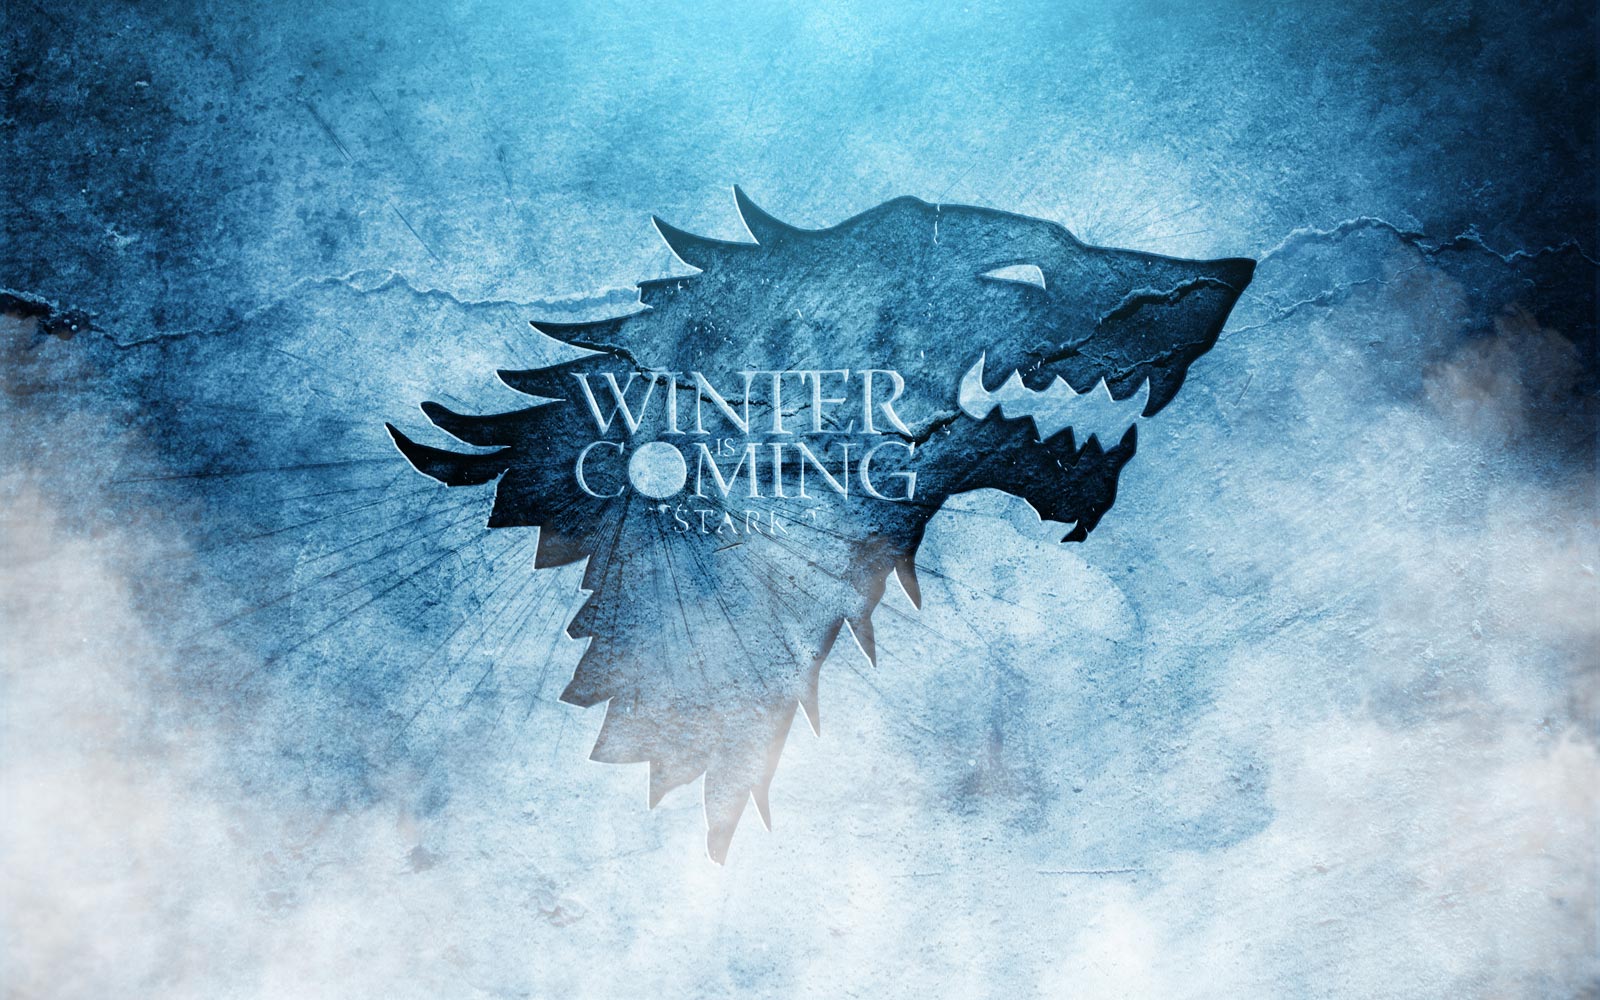 game_of_thrones__house_stark_by_ricreations-d5191zw.jpg